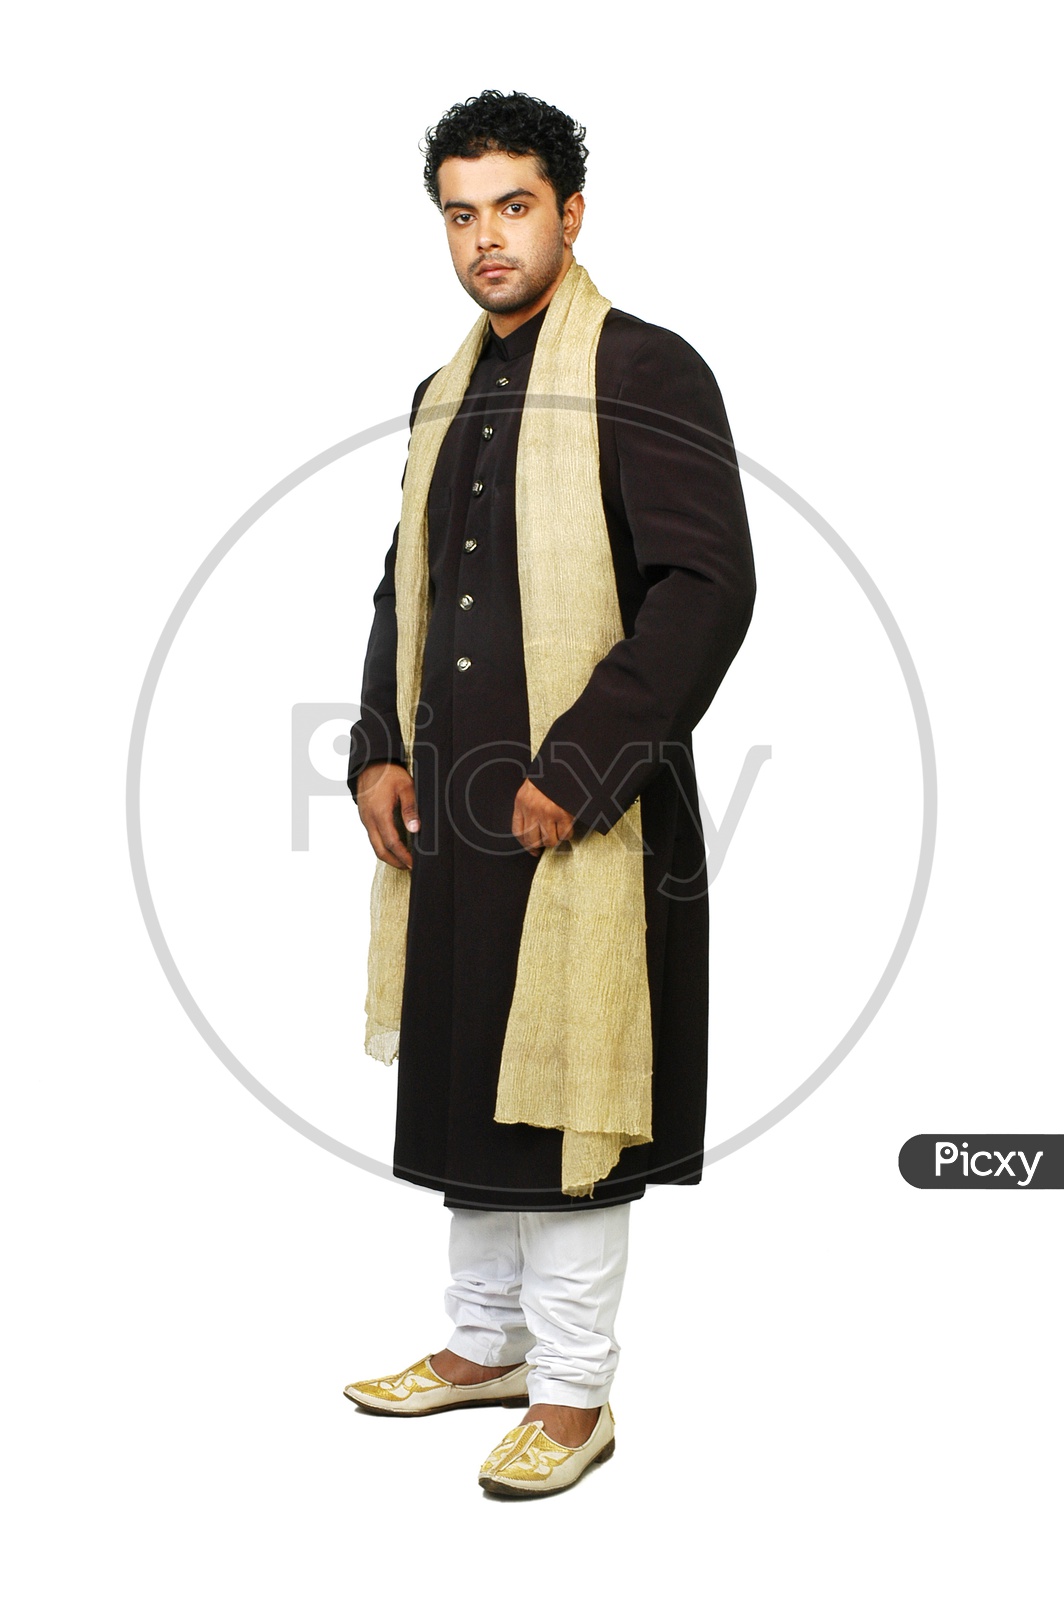 Image of Indian Man Wearing Traditional Wear and Showing  Space-UH778378-Picxy